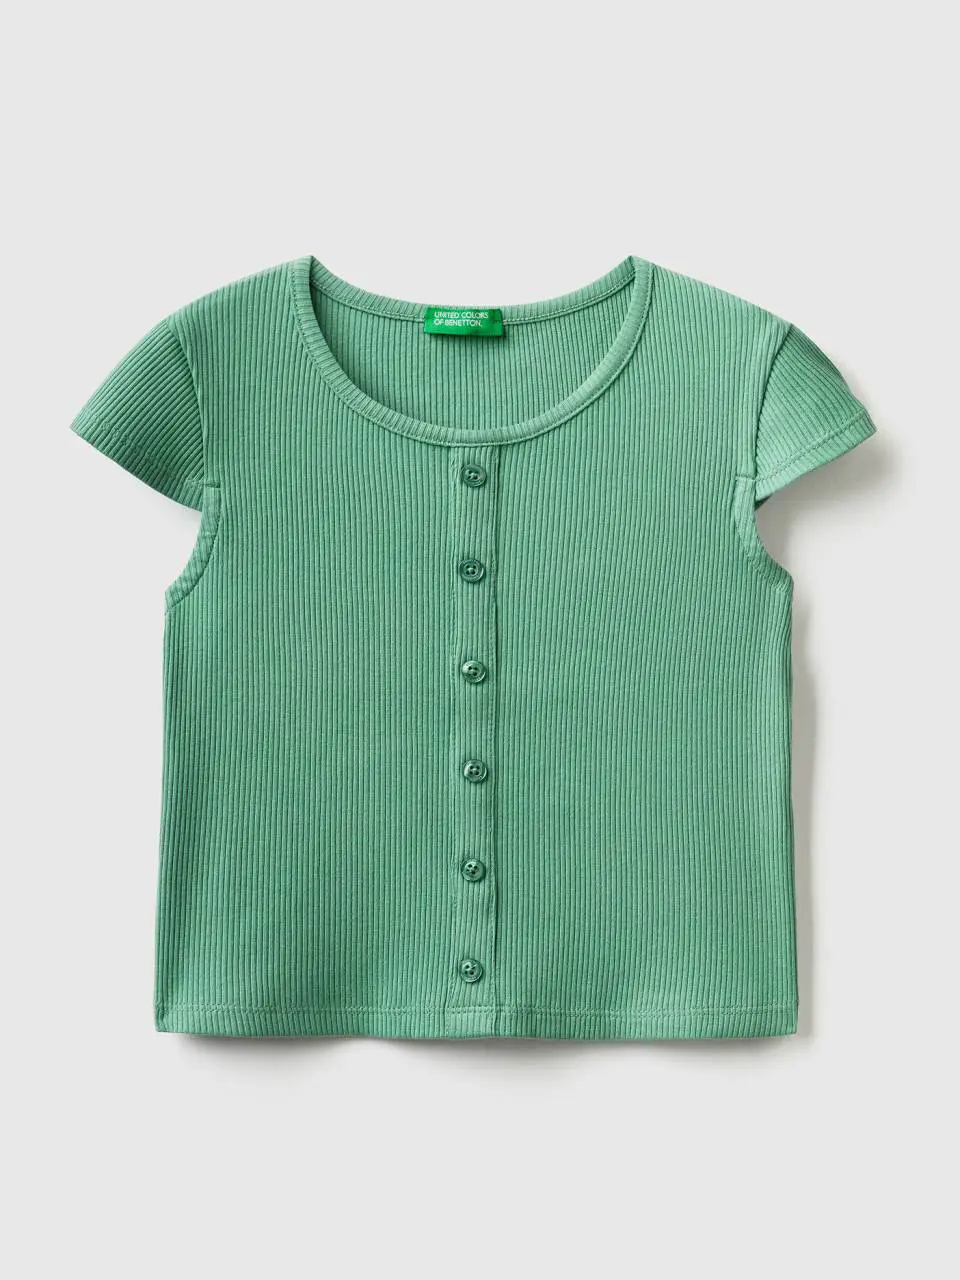 Benetton ribbed t-shirt with buttons. 1